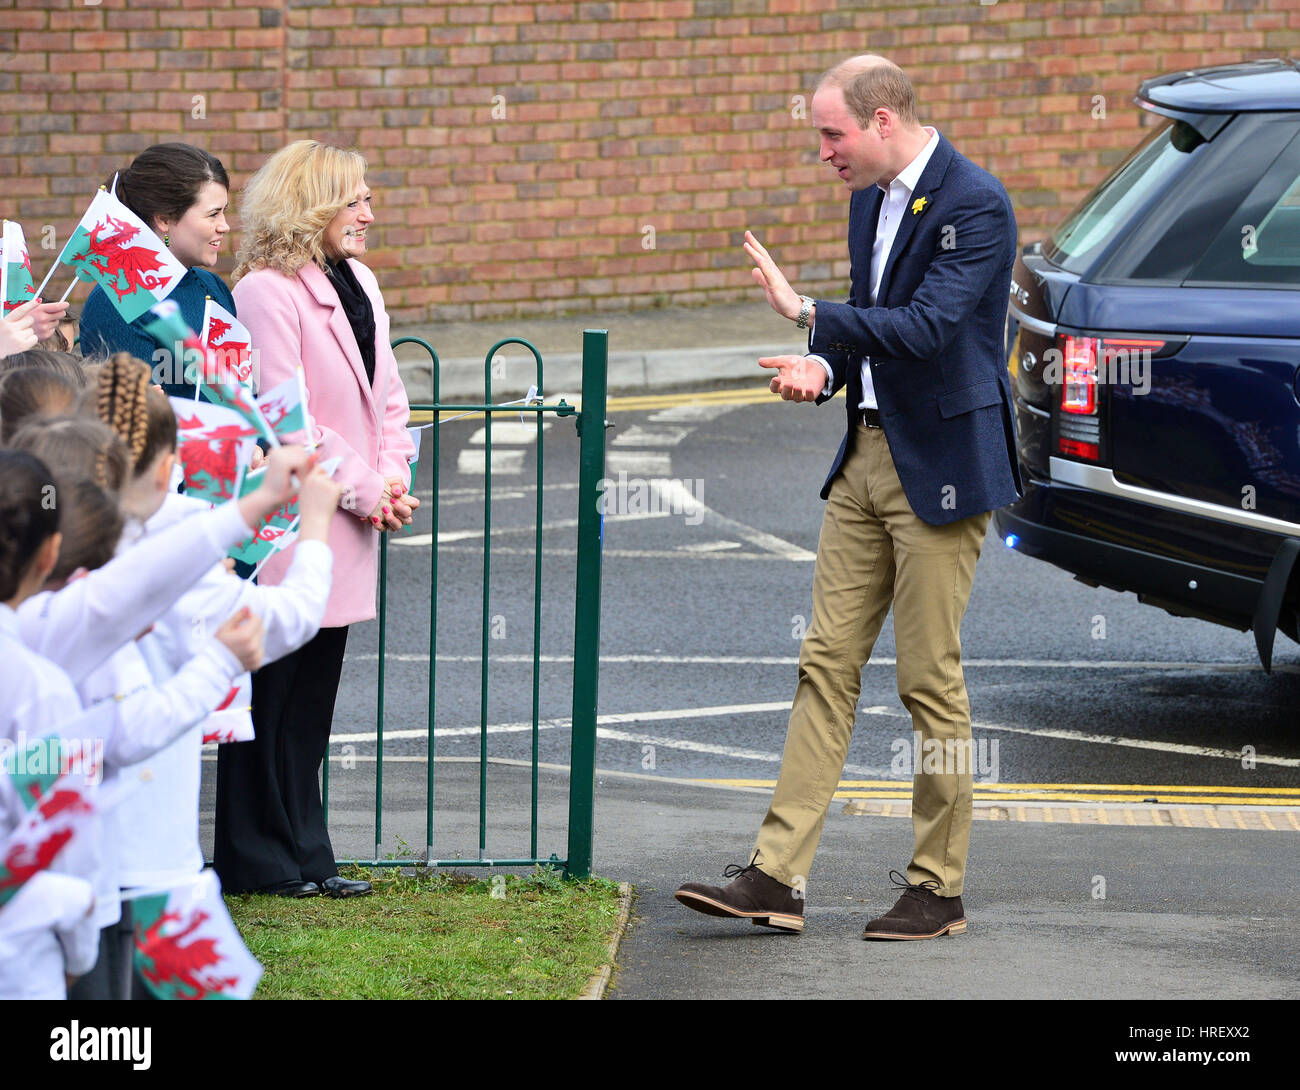 The Duke of Cambridge arrives at Llanfoist Fawr Primary School in Abergavenny, Wales, to officially launch the SkillForce Prince William Award encouraging children to develop good character, confidence and resilience. Stock Photo